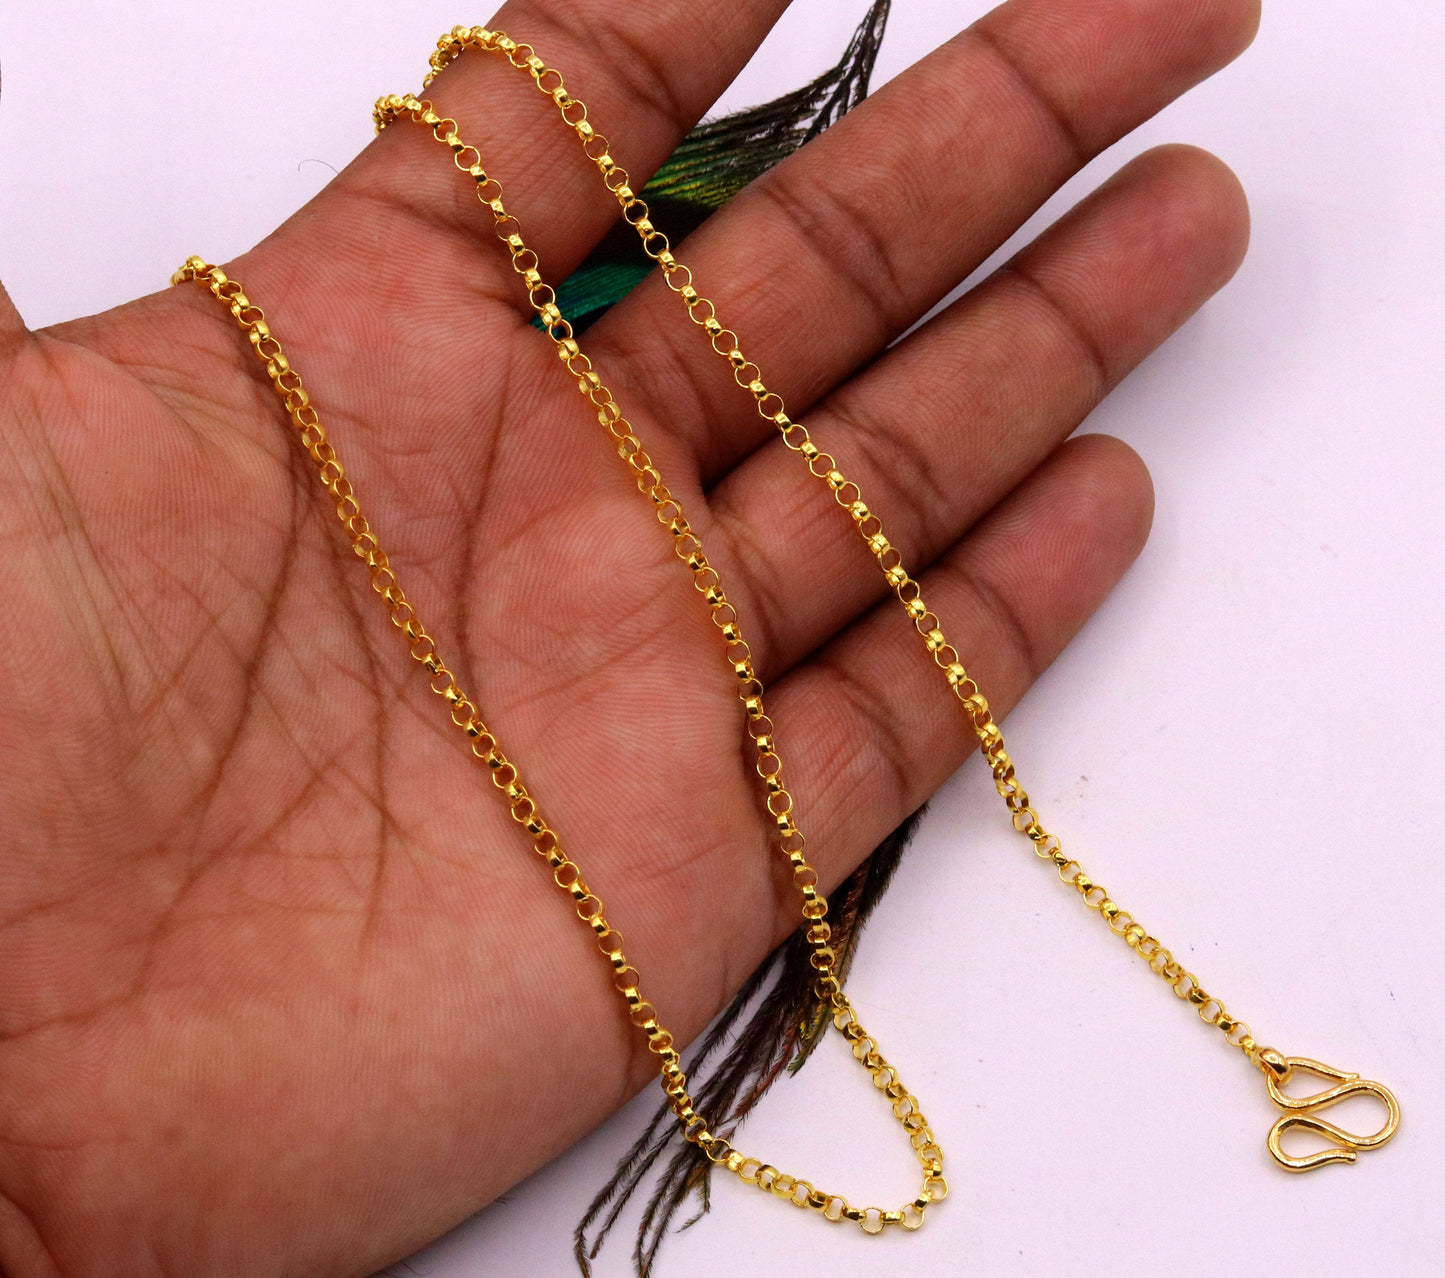 Handmade Genuine 22karat yellow gold gorgeous cable rolo chain stylish chain gifting jewelry from india - TRIBAL ORNAMENTS